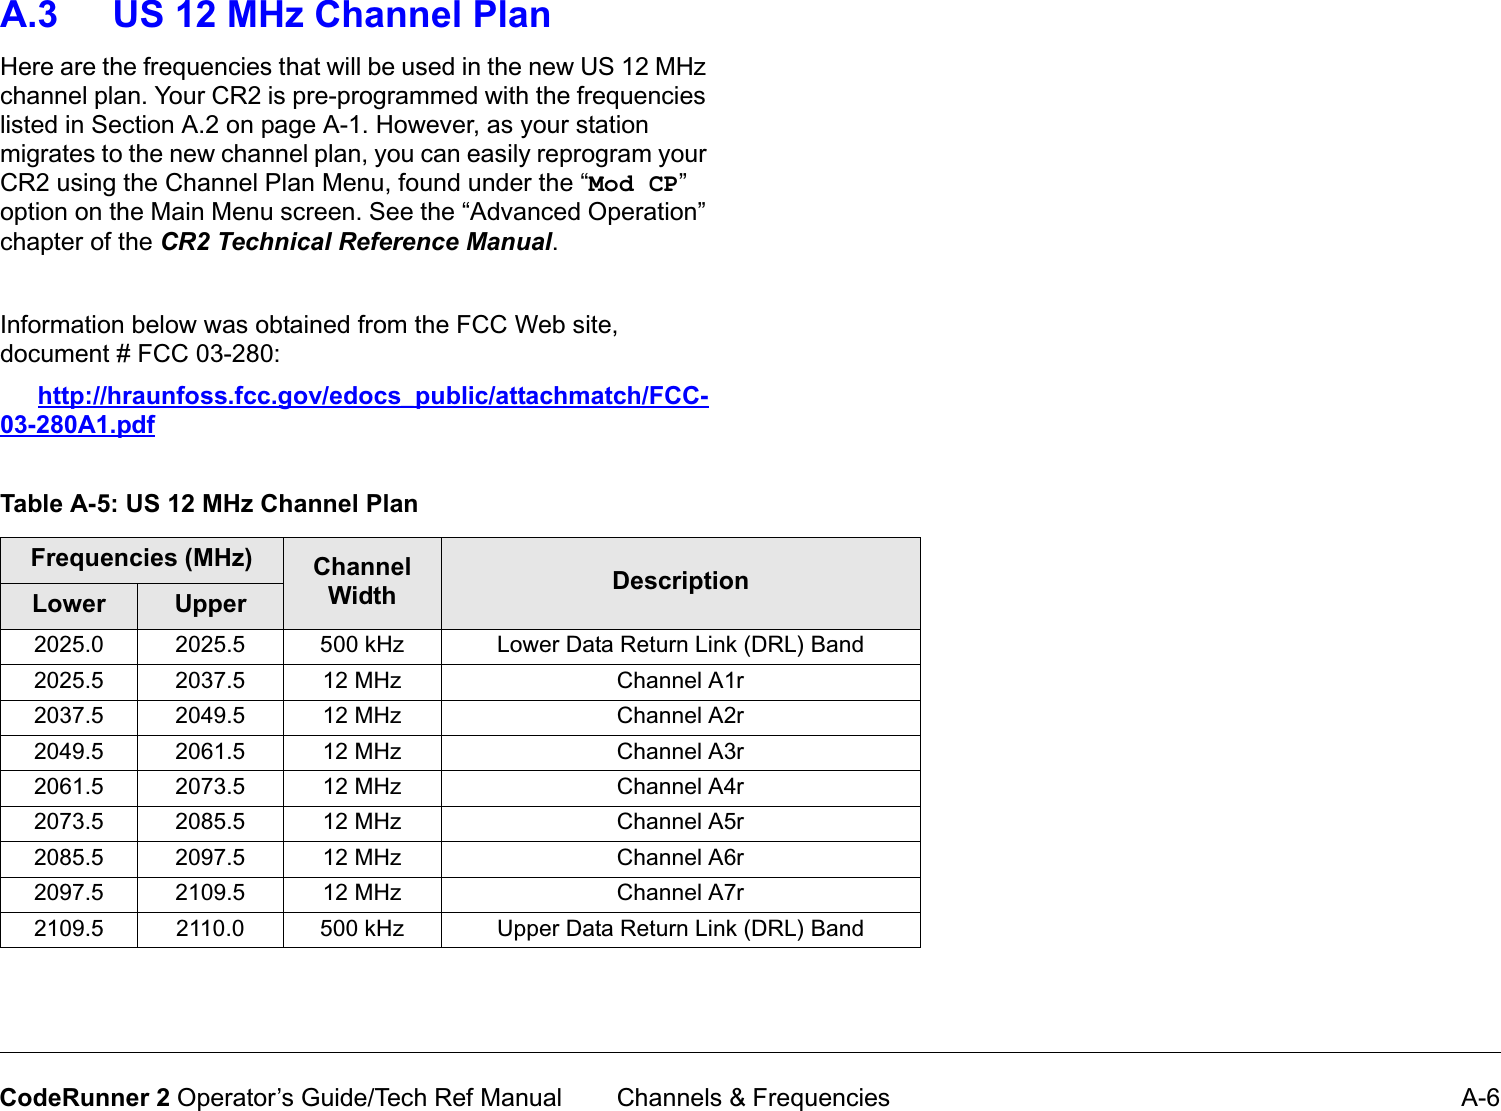  Channels &amp; Frequencies A-6CodeRunner 2 Operator’s Guide/Tech Ref ManualA.3 US 12 MHz Channel PlanHere are the frequencies that will be used in the new US 12 MHz channel plan. Your CR2 is pre-programmed with the frequencies listed in Section A.2 on page A-1. However, as your station migrates to the new channel plan, you can easily reprogram your CR2 using the Channel Plan Menu, found under the “Mod CP” option on the Main Menu screen. See the “Advanced Operation” chapter of the CR2TechnicalReferenceManual.Information below was obtained from the FCC Web site, document # FCC 03-280:http://hraunfoss.fcc.gov/edocs_public/attachmatch/FCC-03-280A1.pdfTable A-5: US 12 MHz Channel PlanFrequencies (MHz) Channel Width DescriptionLower Upper2025.0 2025.5 500 kHz Lower Data Return Link (DRL) Band2025.5 2037.5 12 MHz Channel A1r2037.5 2049.5 12 MHz Channel A2r2049.5 2061.5 12 MHz Channel A3r2061.5 2073.5 12 MHz Channel A4r2073.5 2085.5 12 MHz Channel A5r2085.5 2097.5 12 MHz Channel A6r2097.5 2109.5 12 MHz Channel A7r2109.5 2110.0 500 kHz Upper Data Return Link (DRL) Band